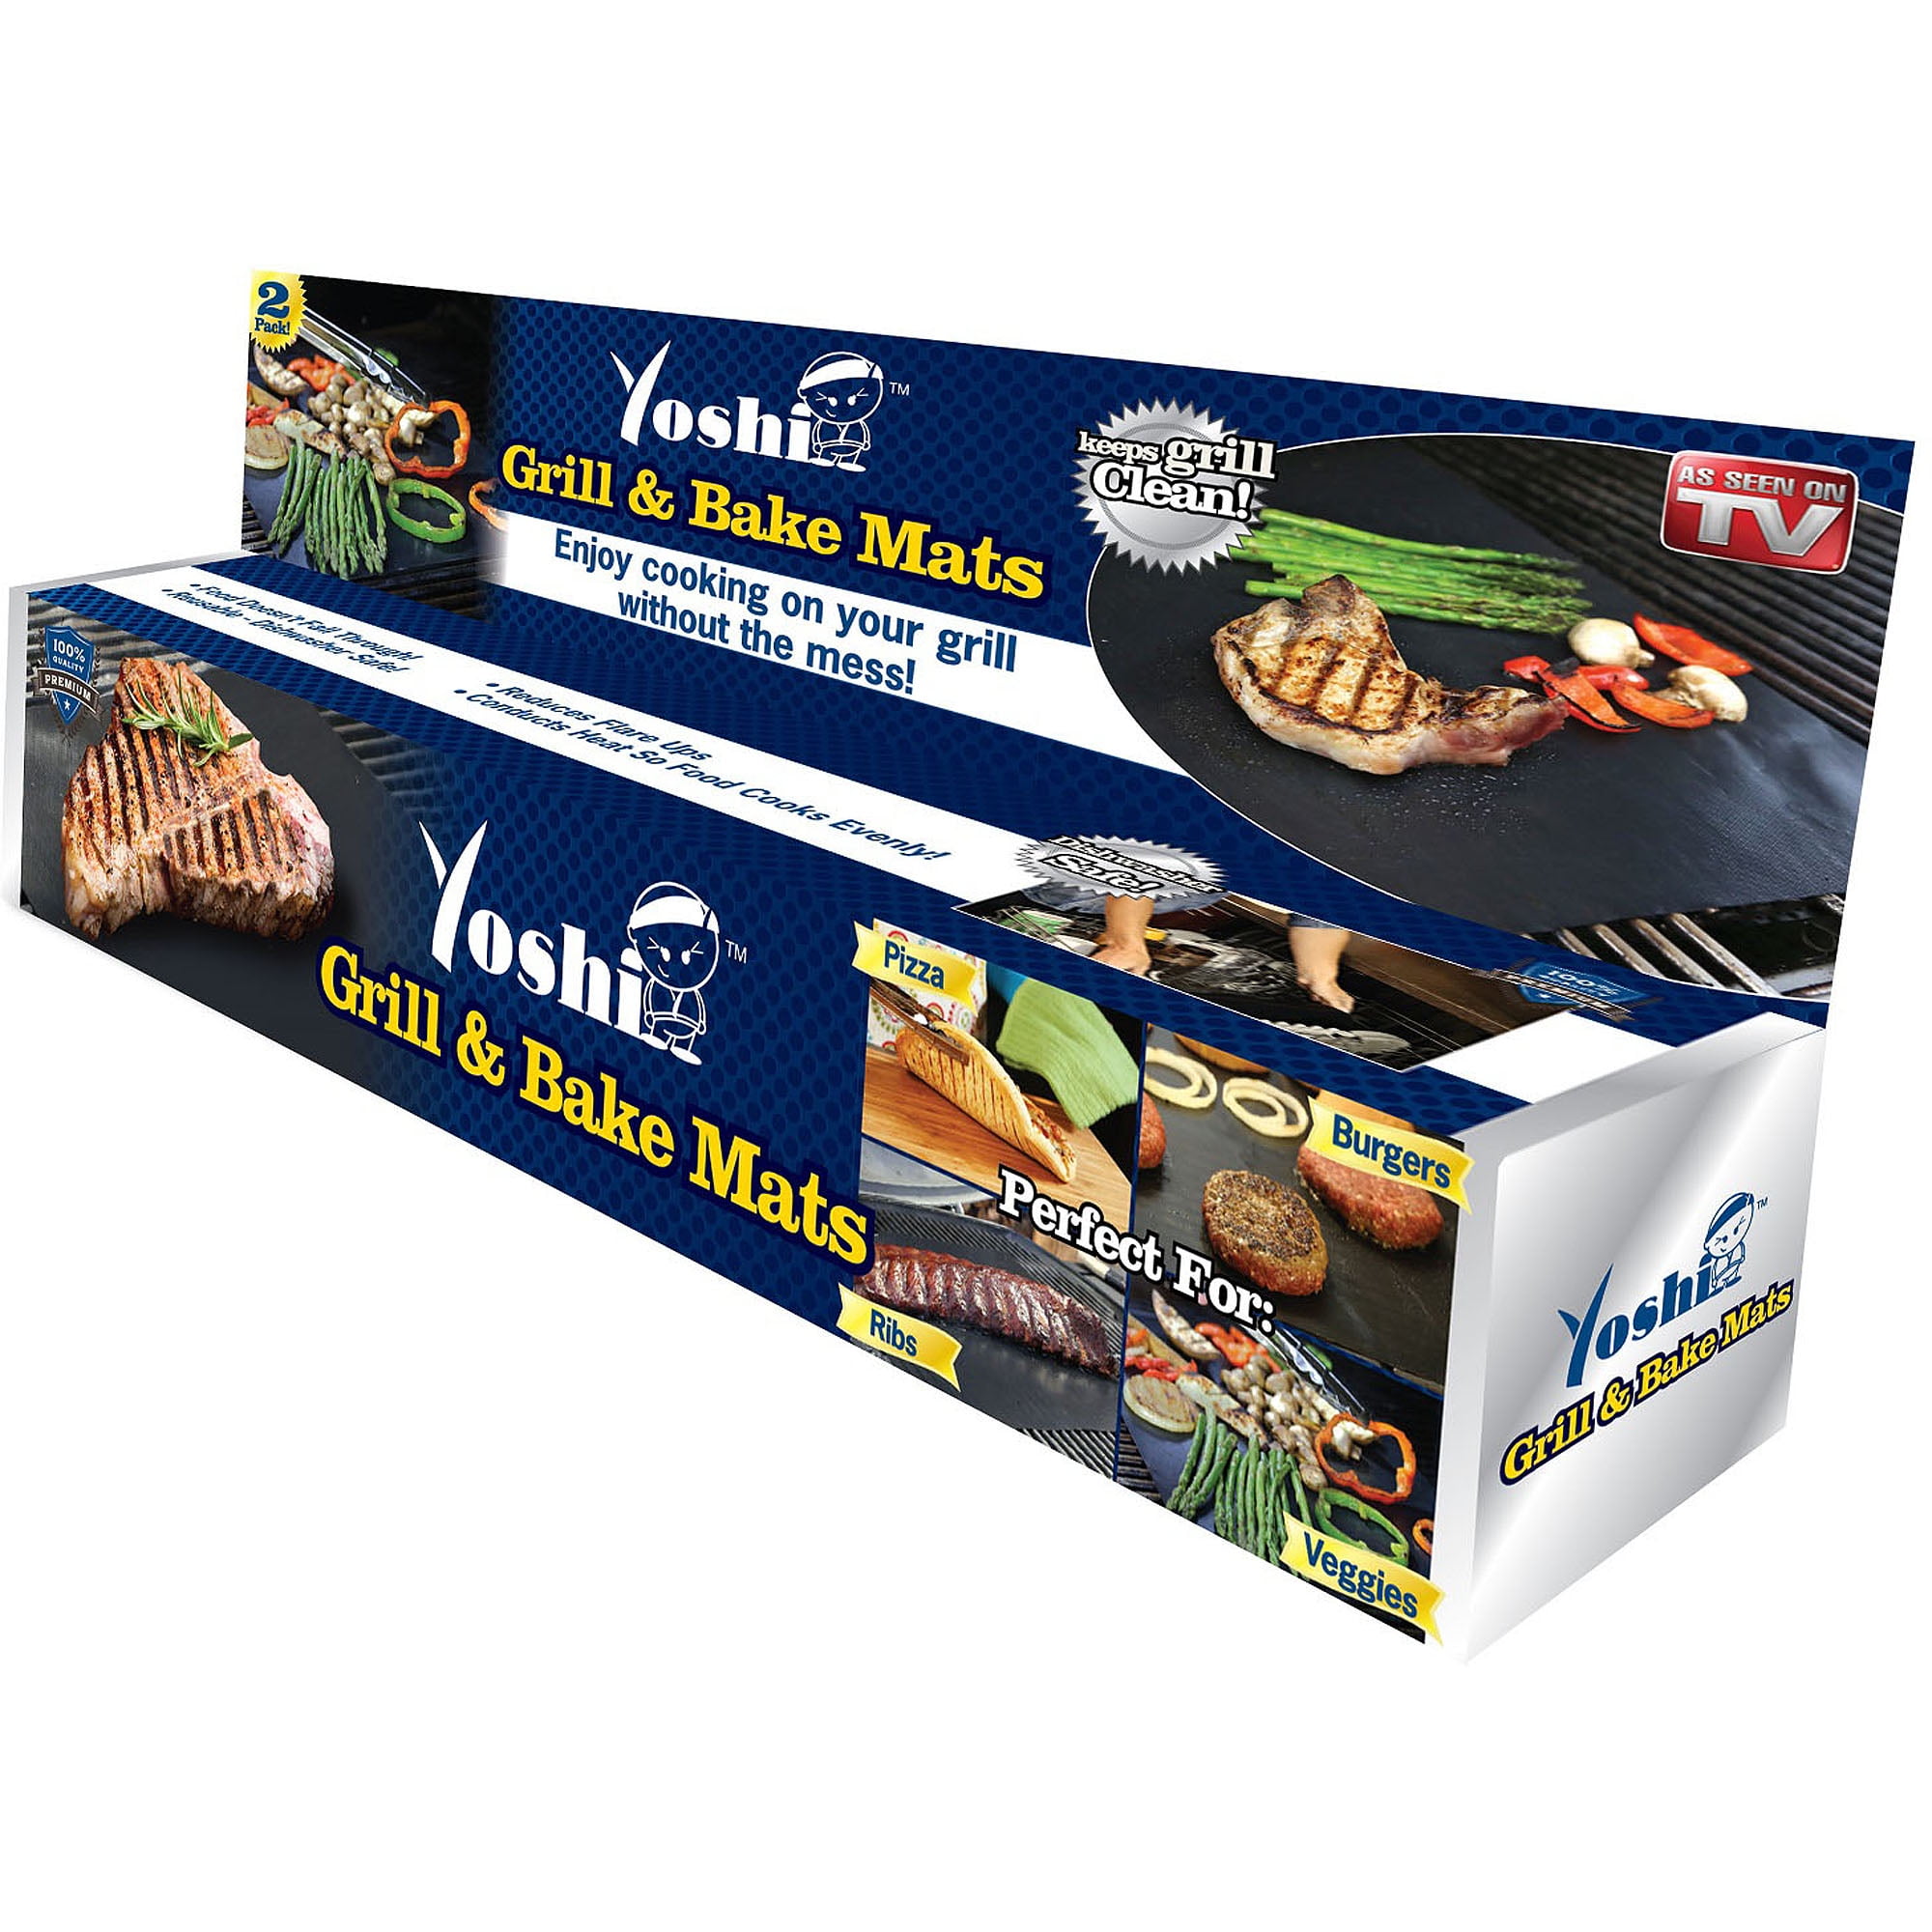 Copper New 2 Pack As Seen on TV Yoshi Grill & Bake Mat 